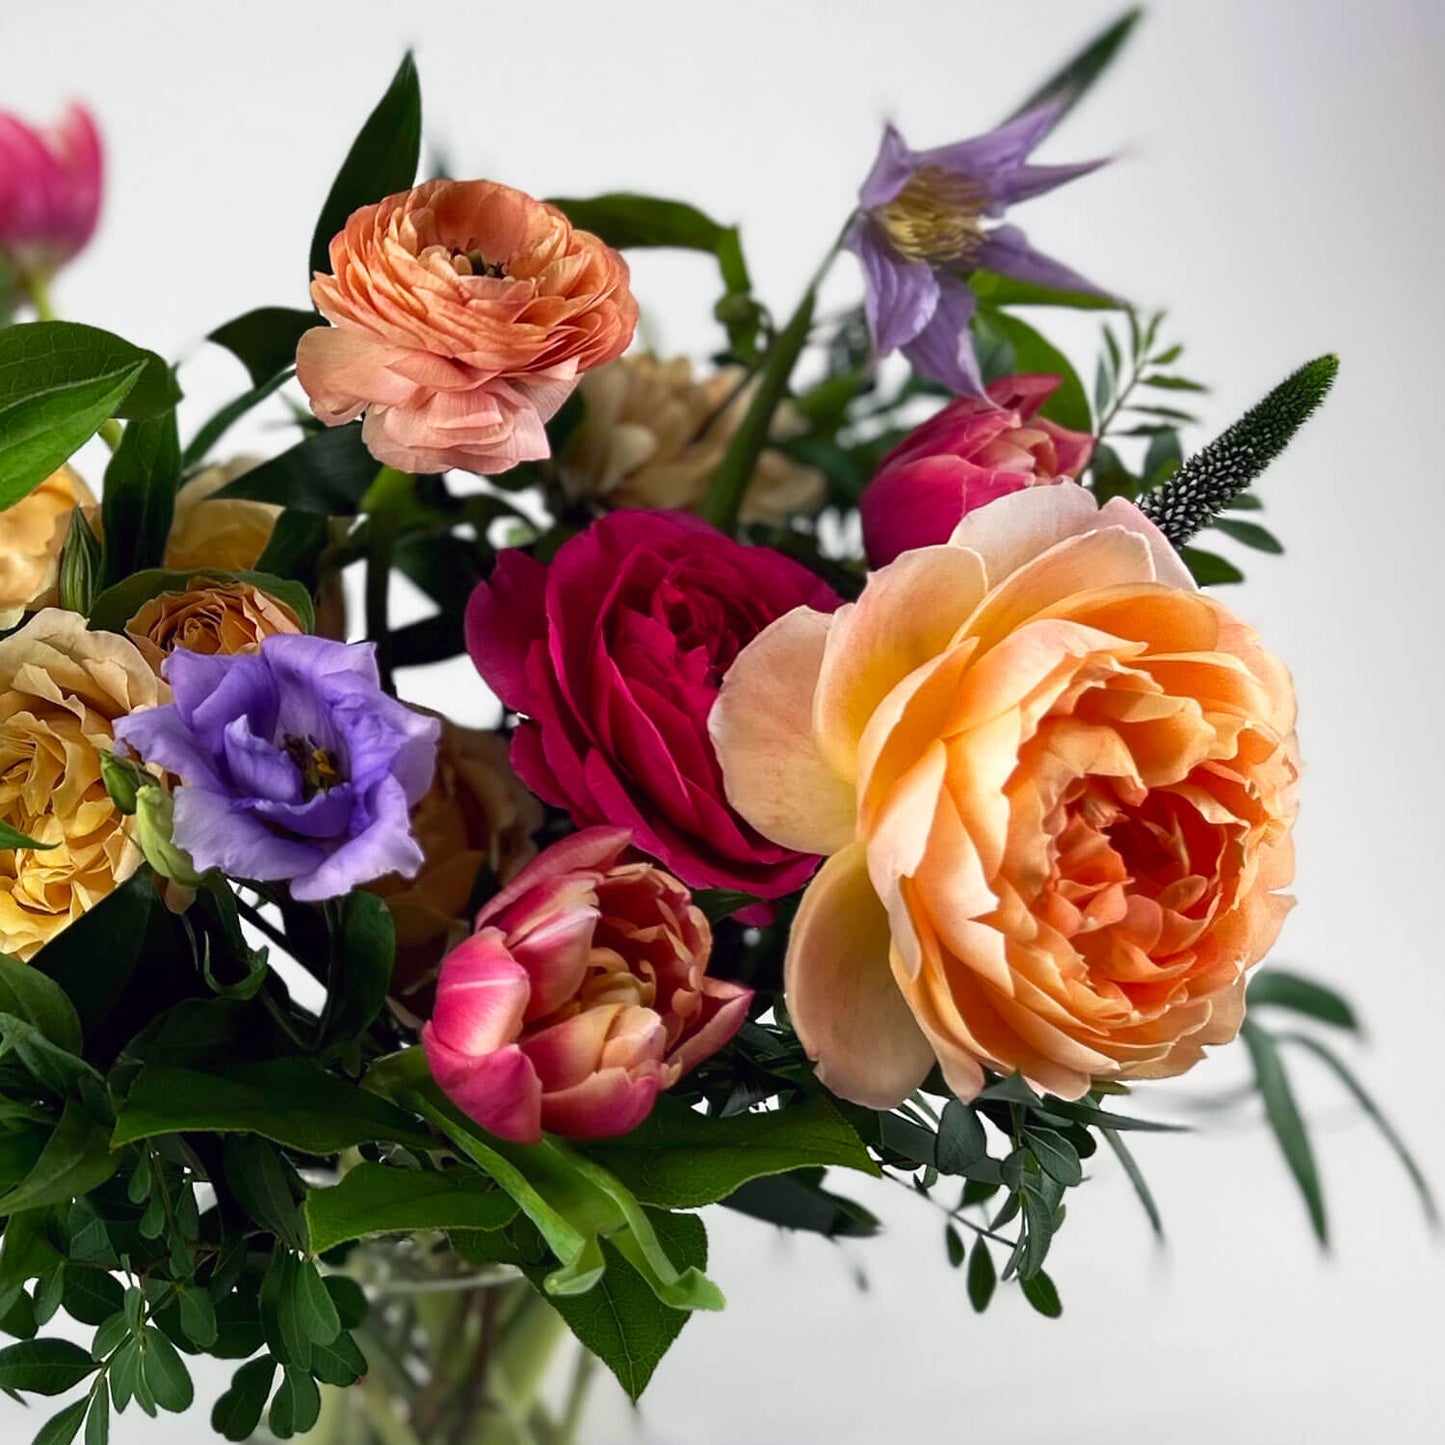 Close-up image of a funny valentines day bouquet with lavender lisianthus, blue clematis, pink, peach, and apricot garden roses, double tulips, apricot ranunculus, and carnations. Order online for same-day flower delivery from Toronto's best florist, available near you.